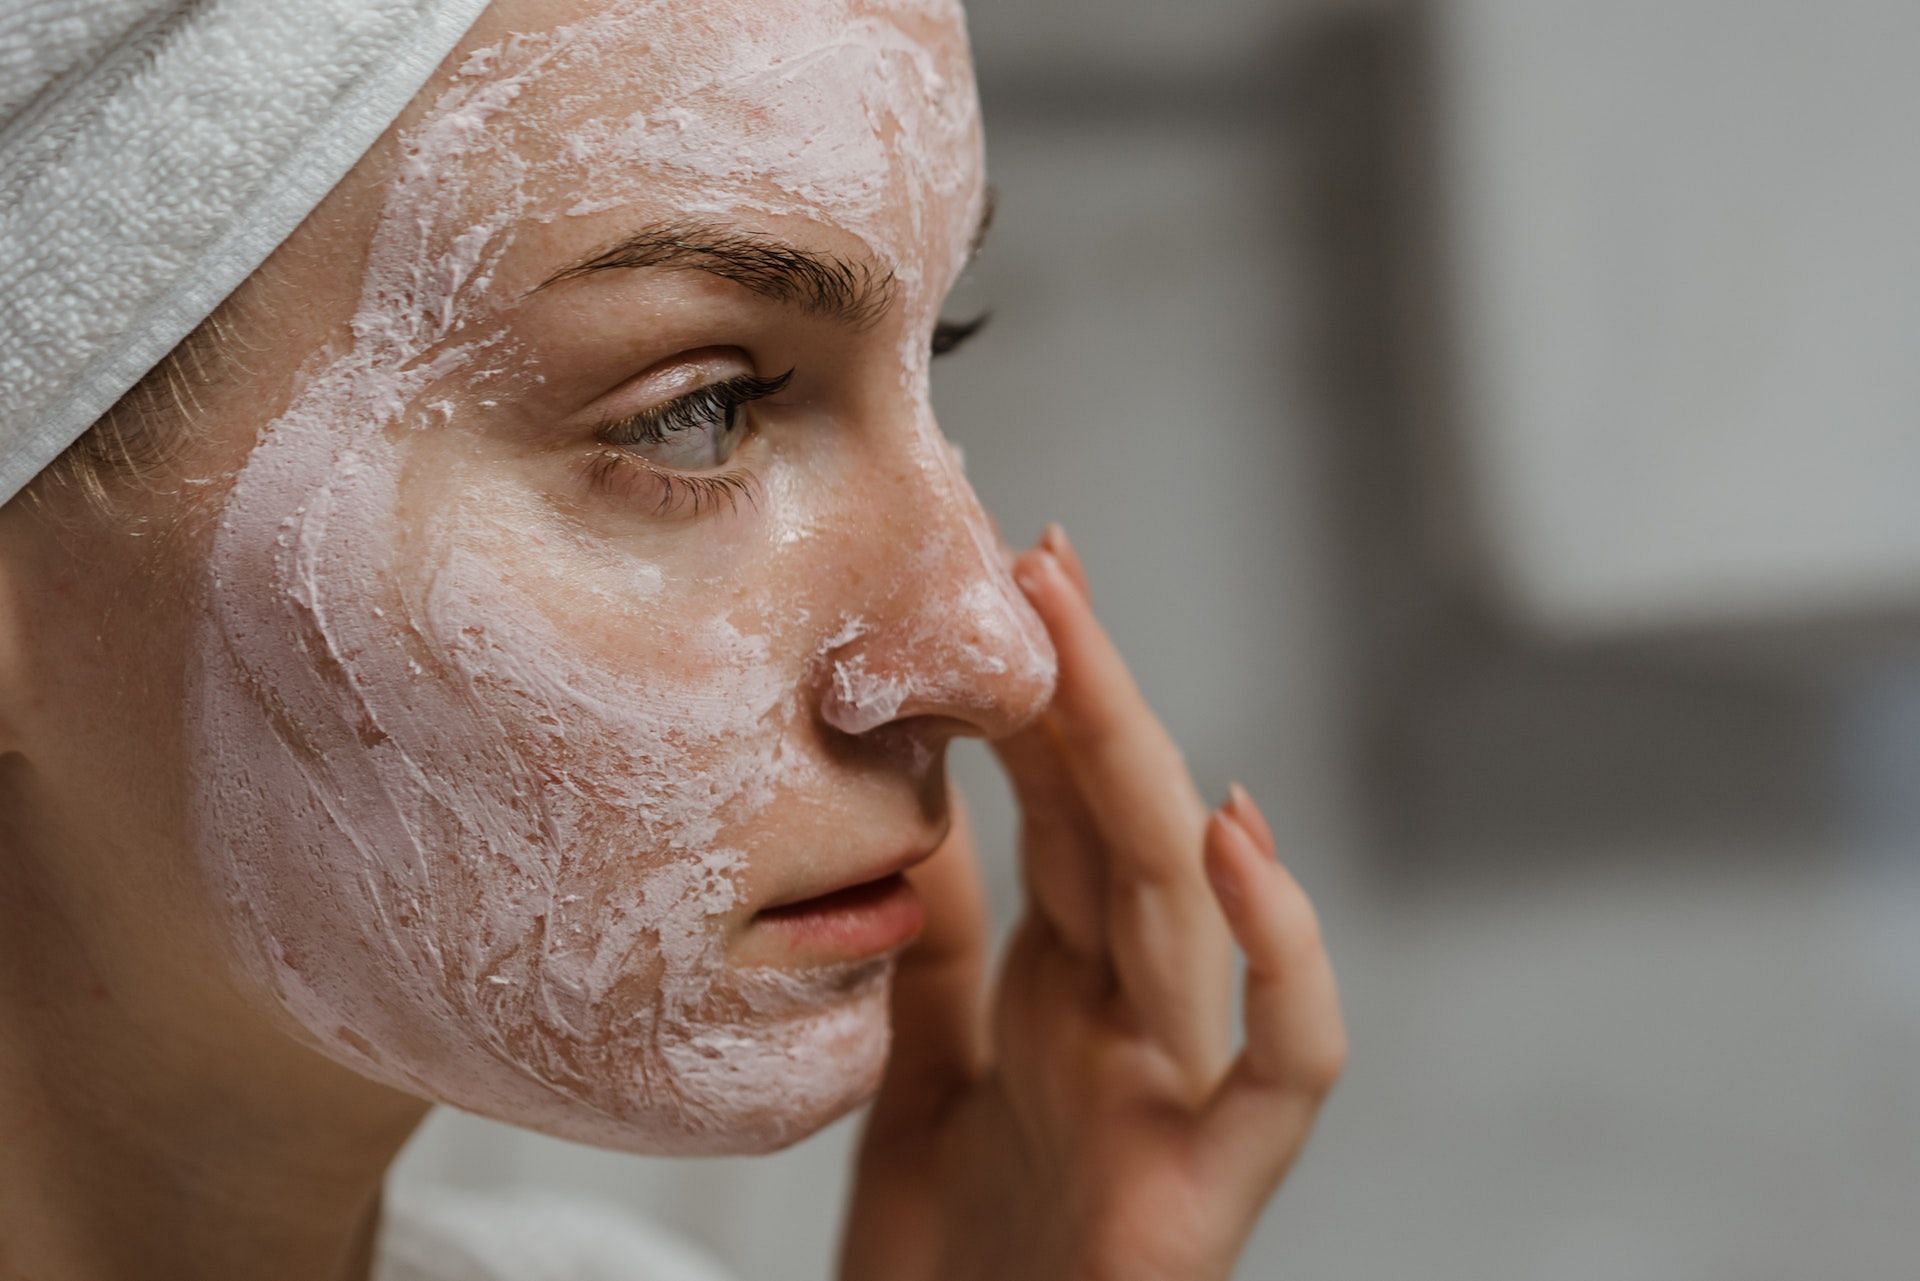 Heavy face creams and cleansers can cause the skin condition. (Photo via Pexels/Polina Kovaleva)